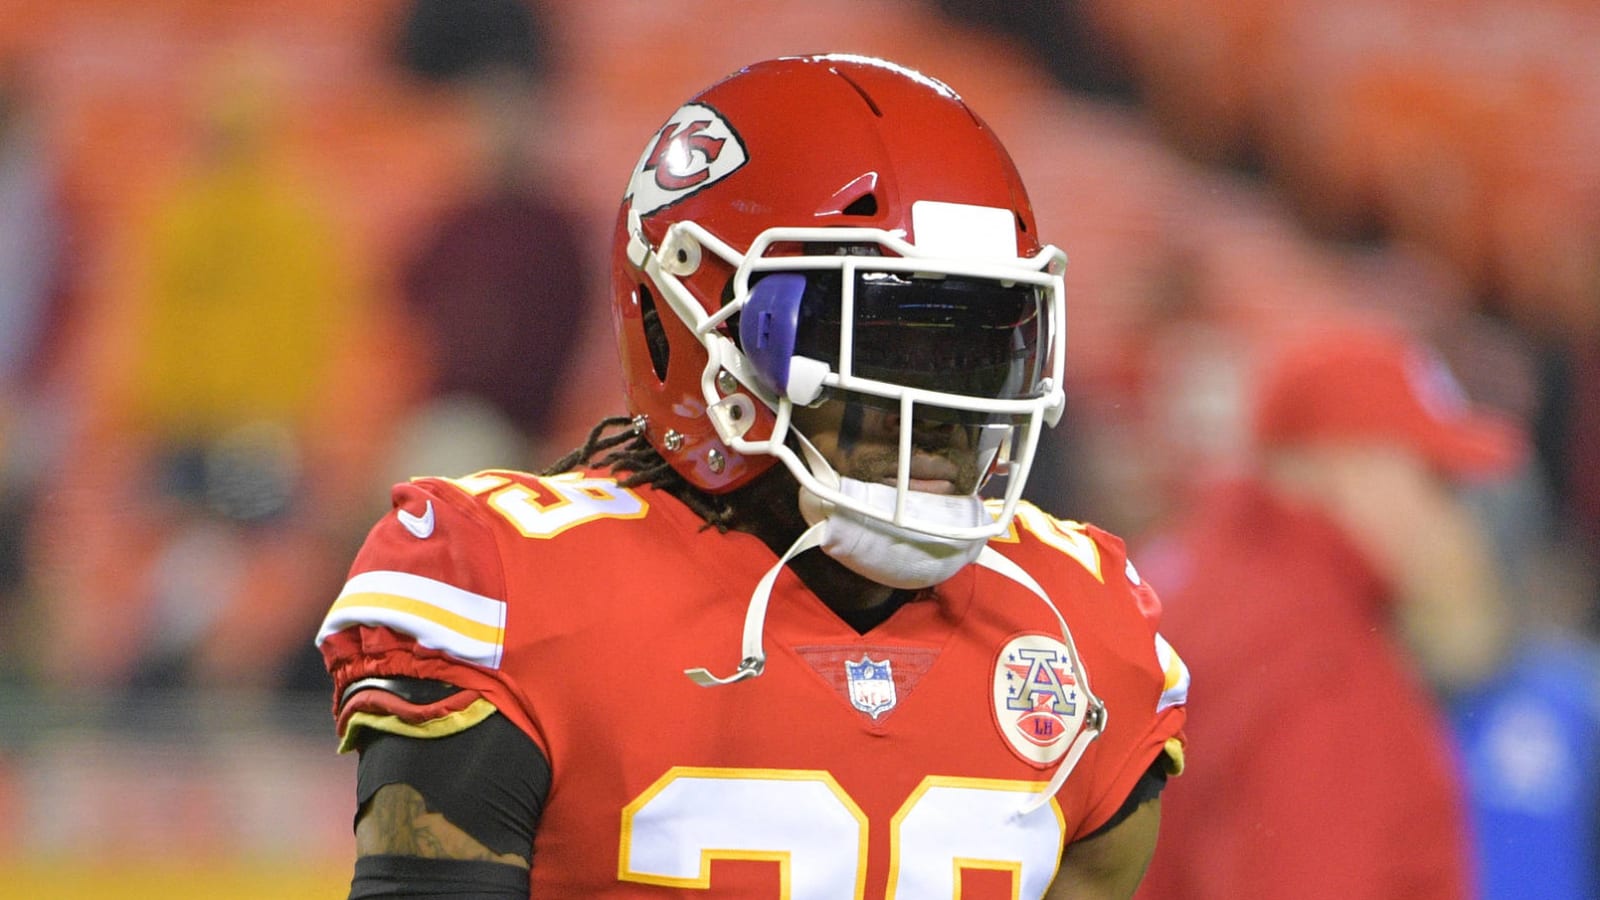 According to this agent, Eric Berry will be back in the NFL